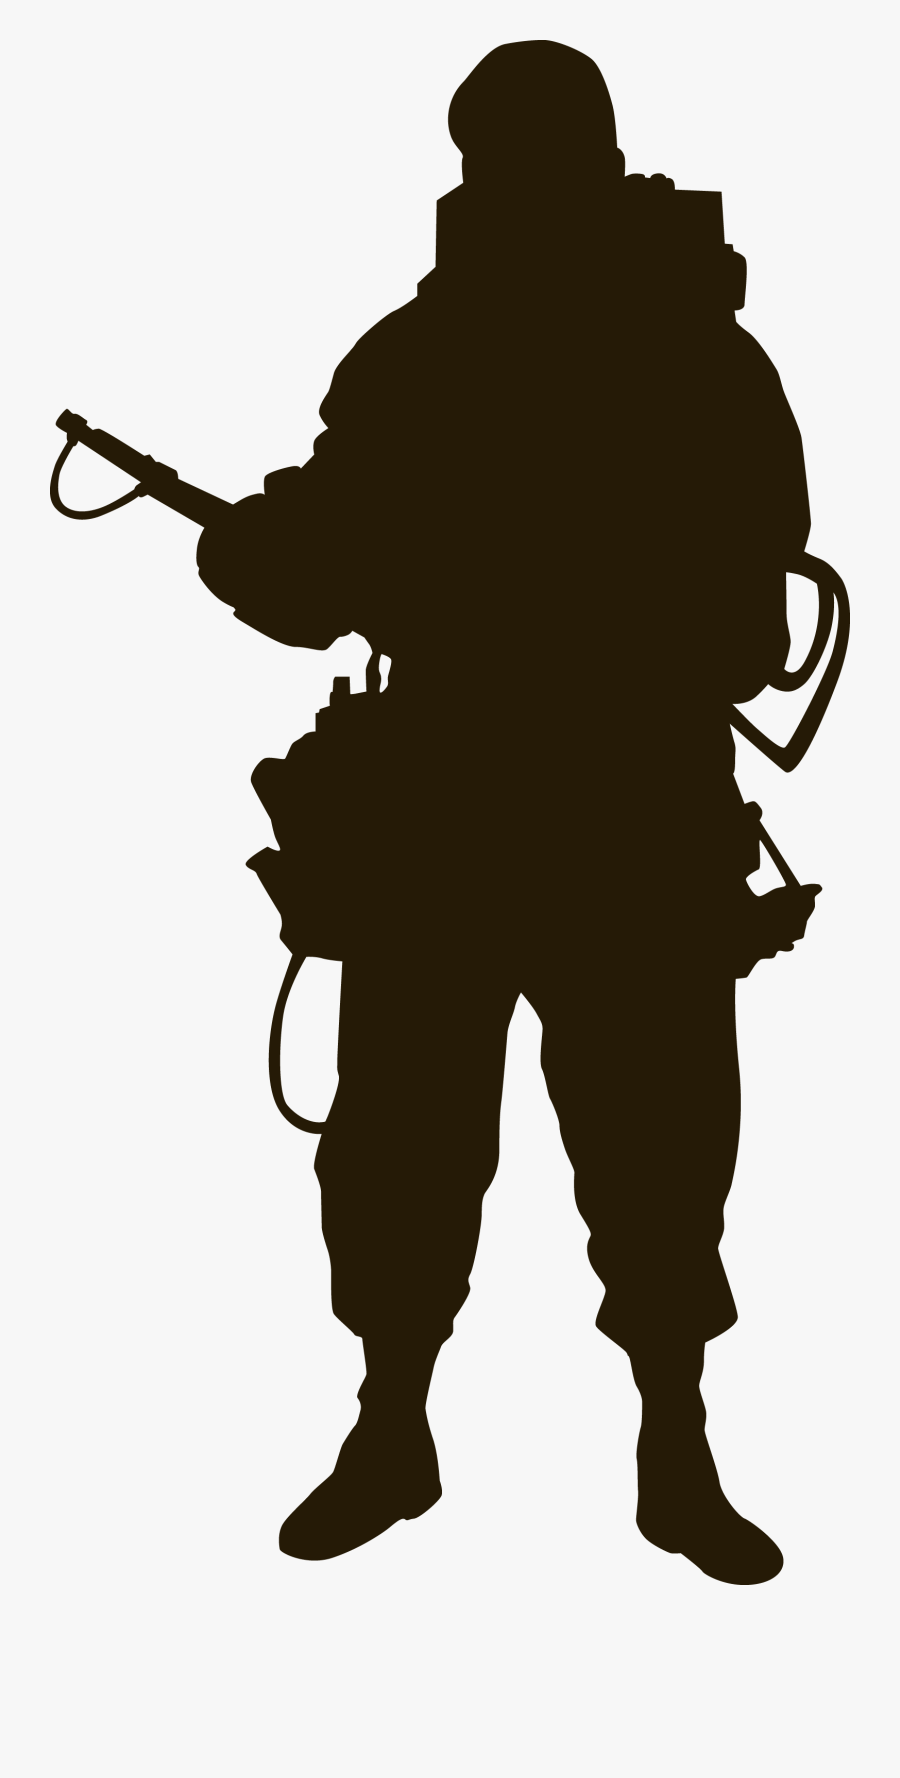 Ghostbusters Svg Silhouette - Transparent Ghostbusters Logo Png, Transparent Clipart